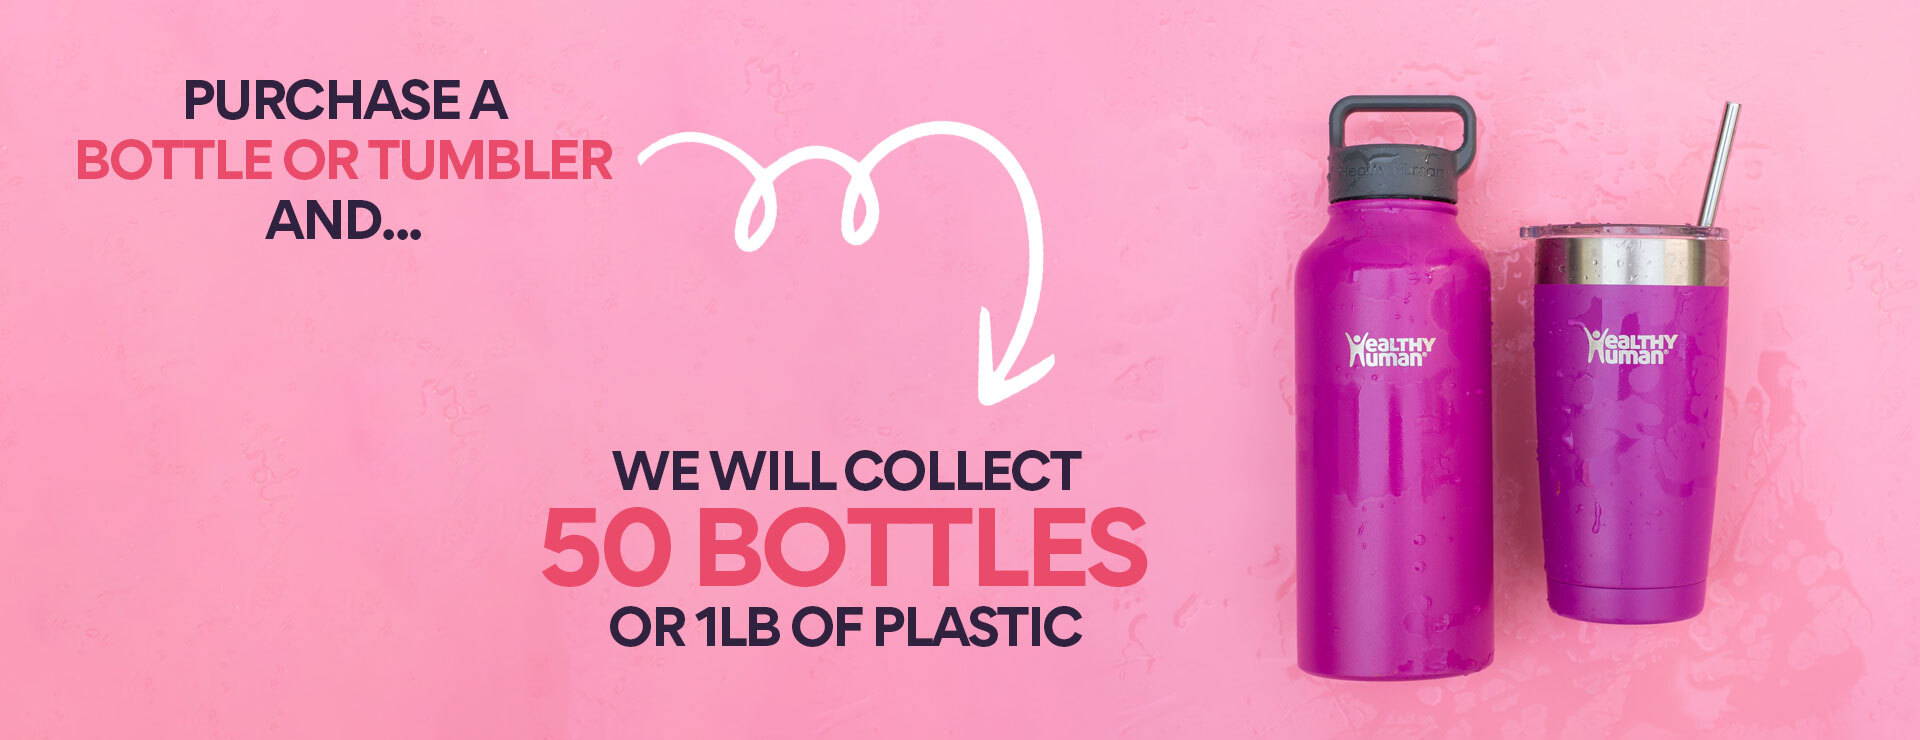 bottle collection for sustainability